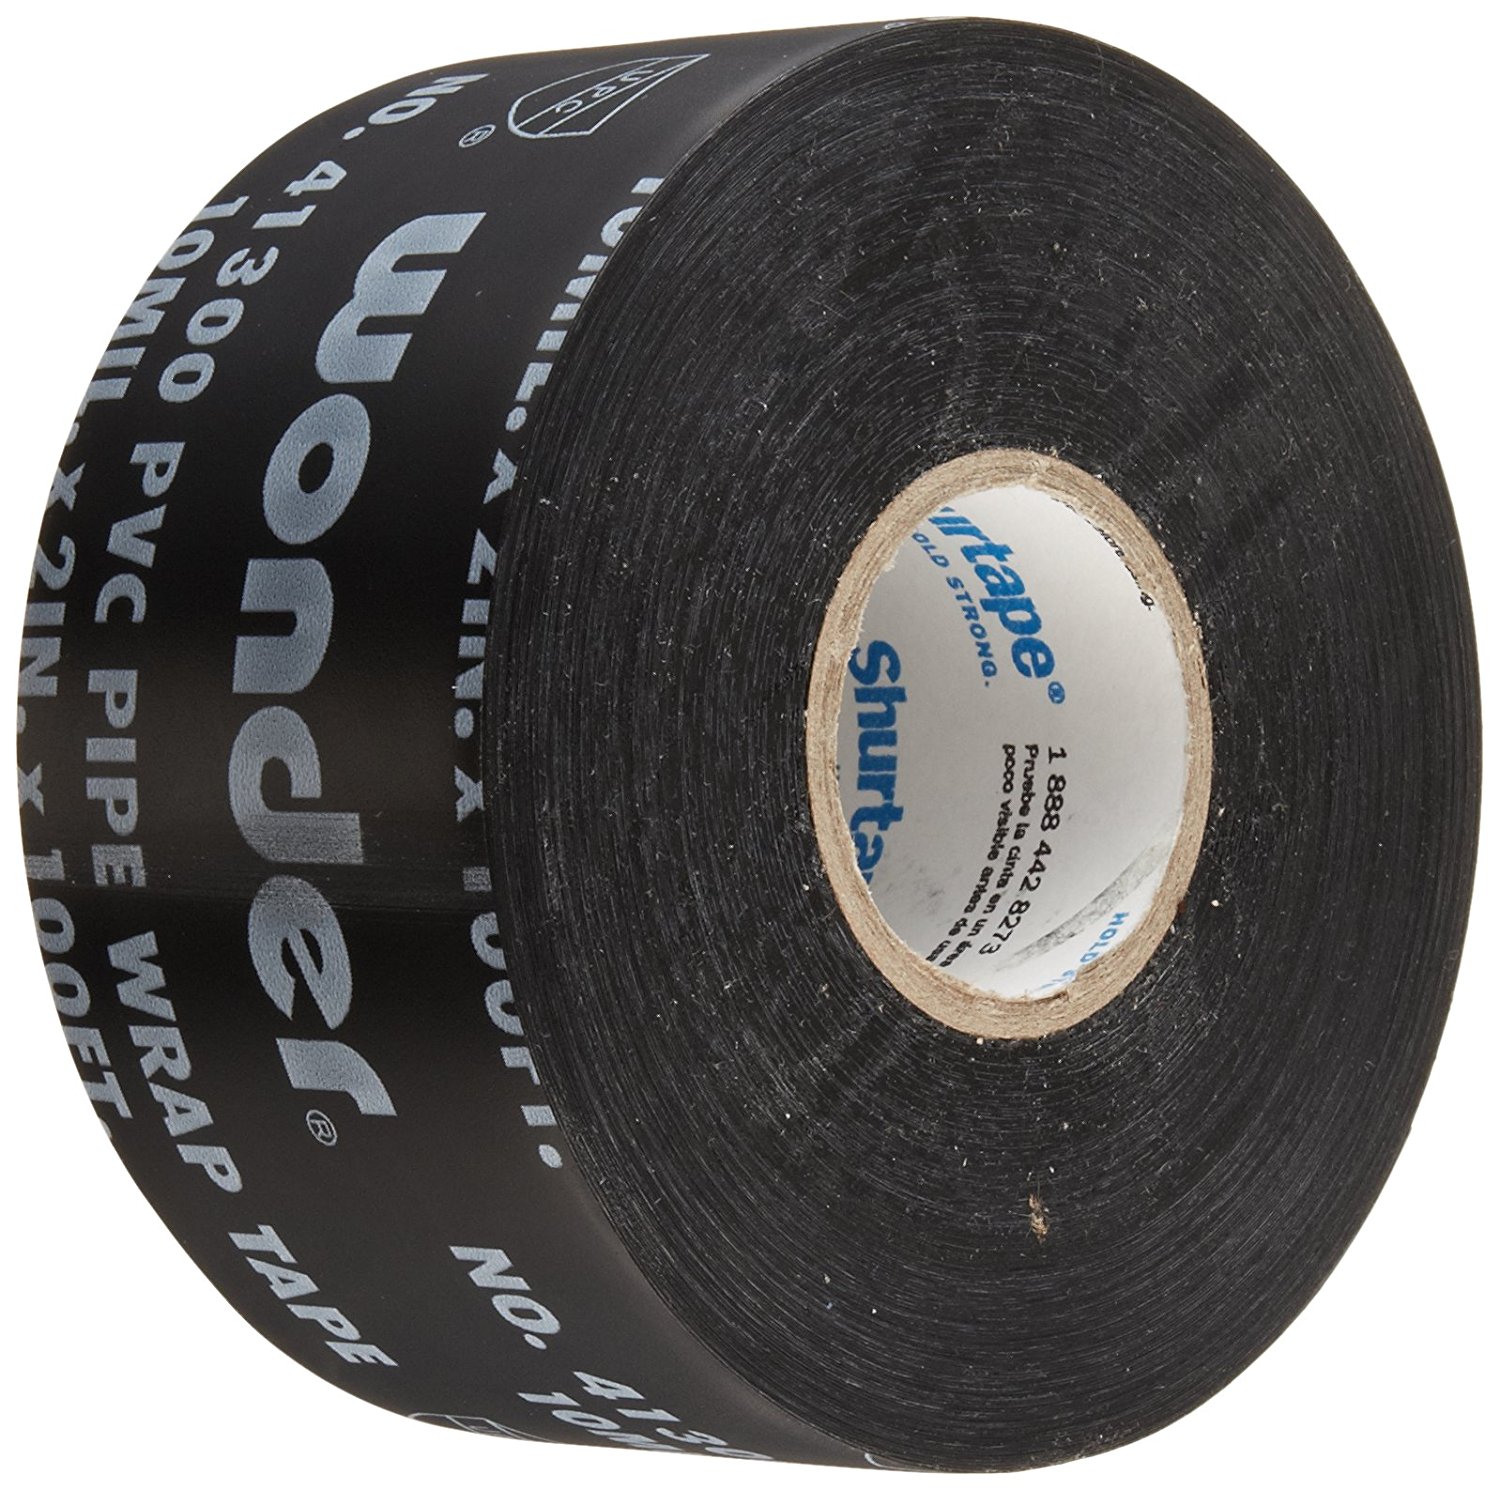 Apt, 10 Mil (2 x 100 ft,) Weatherproof Black PVC Pipe Wrap Tape for Corrosion Protection, Drain Pipe Wrap Tape, Pipe Wrap Insulation Tape for